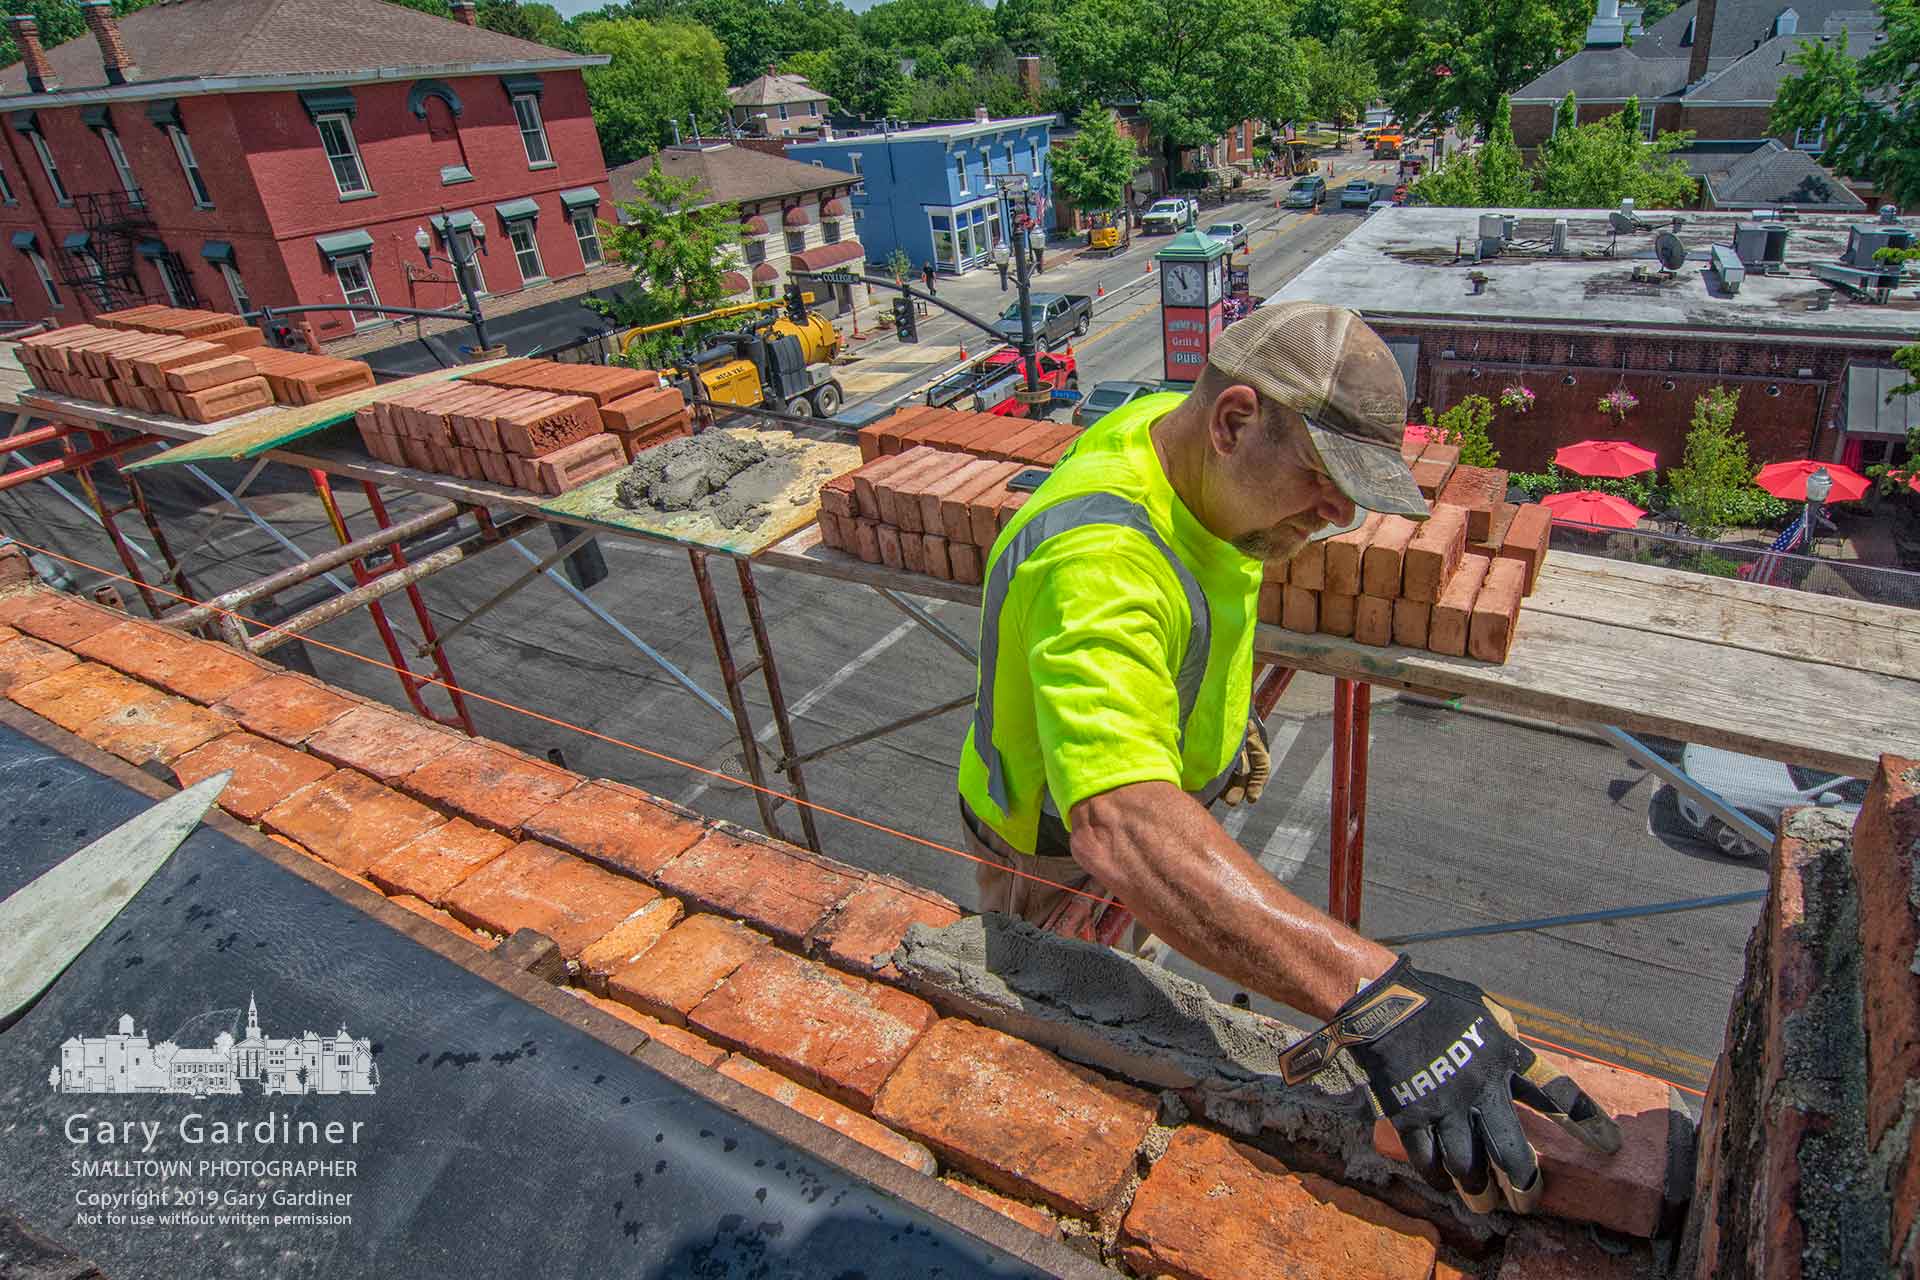 A mason puts in place the first brick to begin repairs to the side of the Cockerell Building on West College after roof repairs revealed loose and damaged bricks. My Final Photo for June 6, 2019.